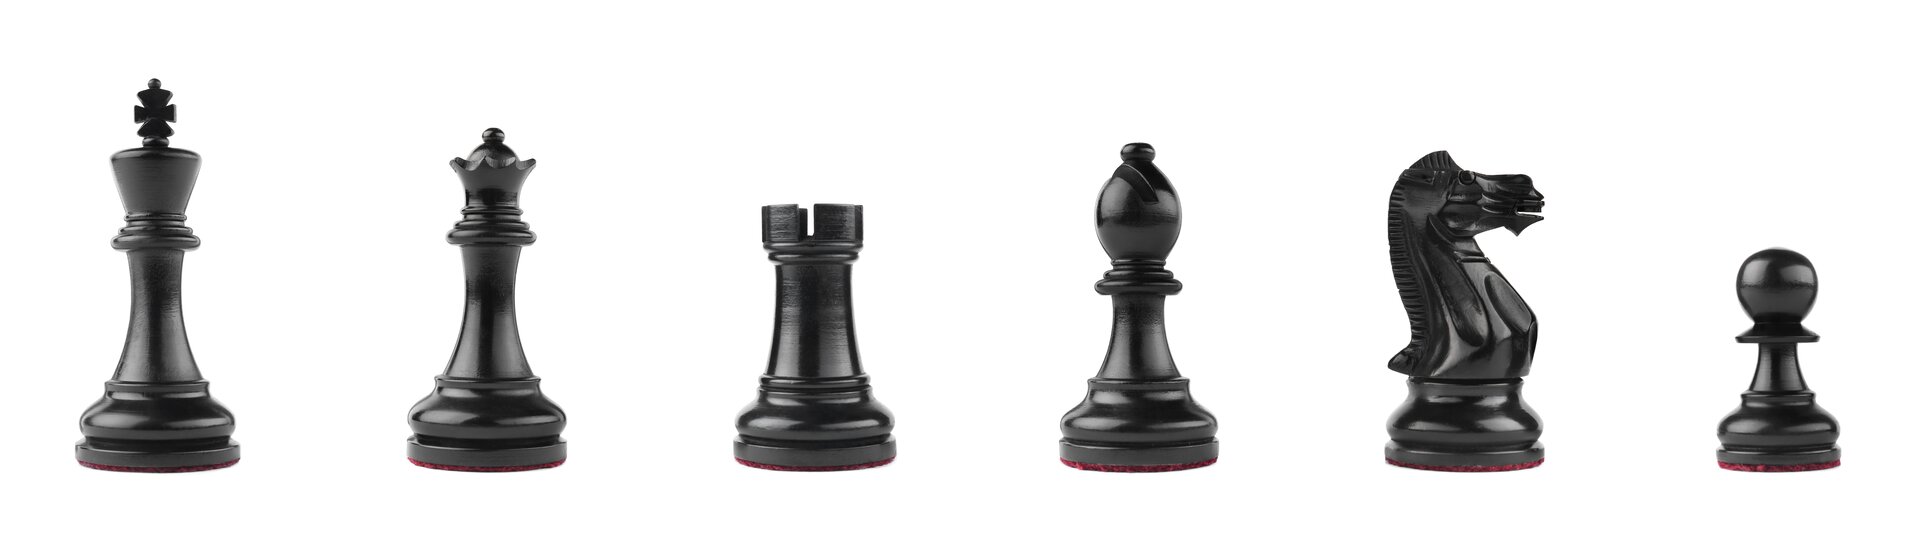 all chess pieces